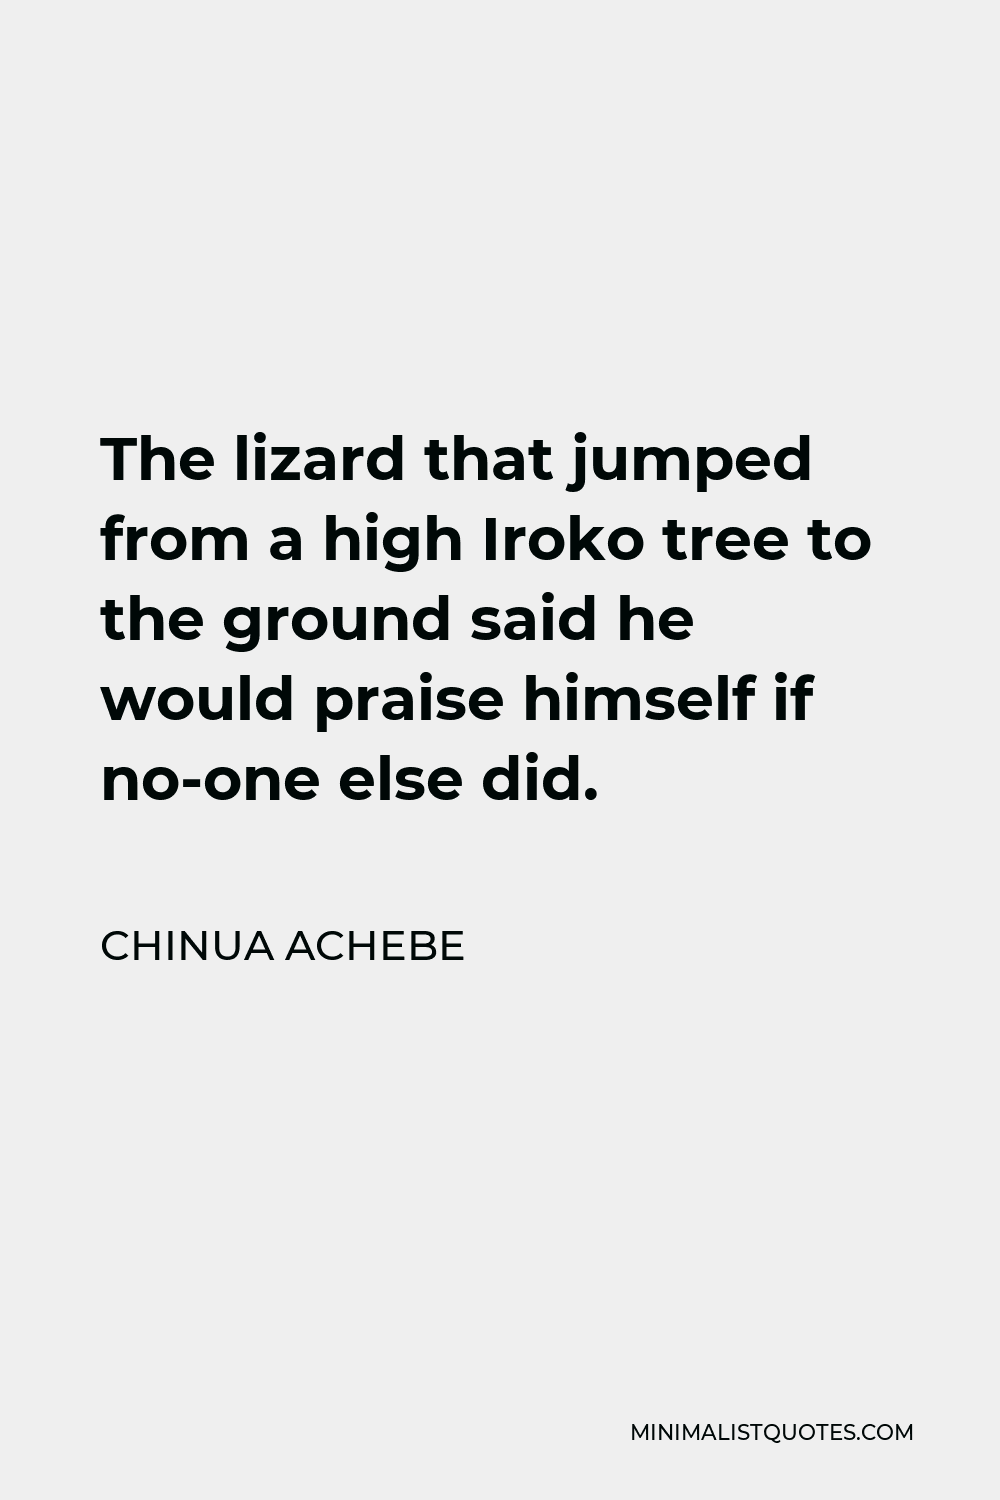 Chinua Achebe Quote - The lizard that jumped from a high Iroko tree to the ground said he would praise himself if no-one else did.